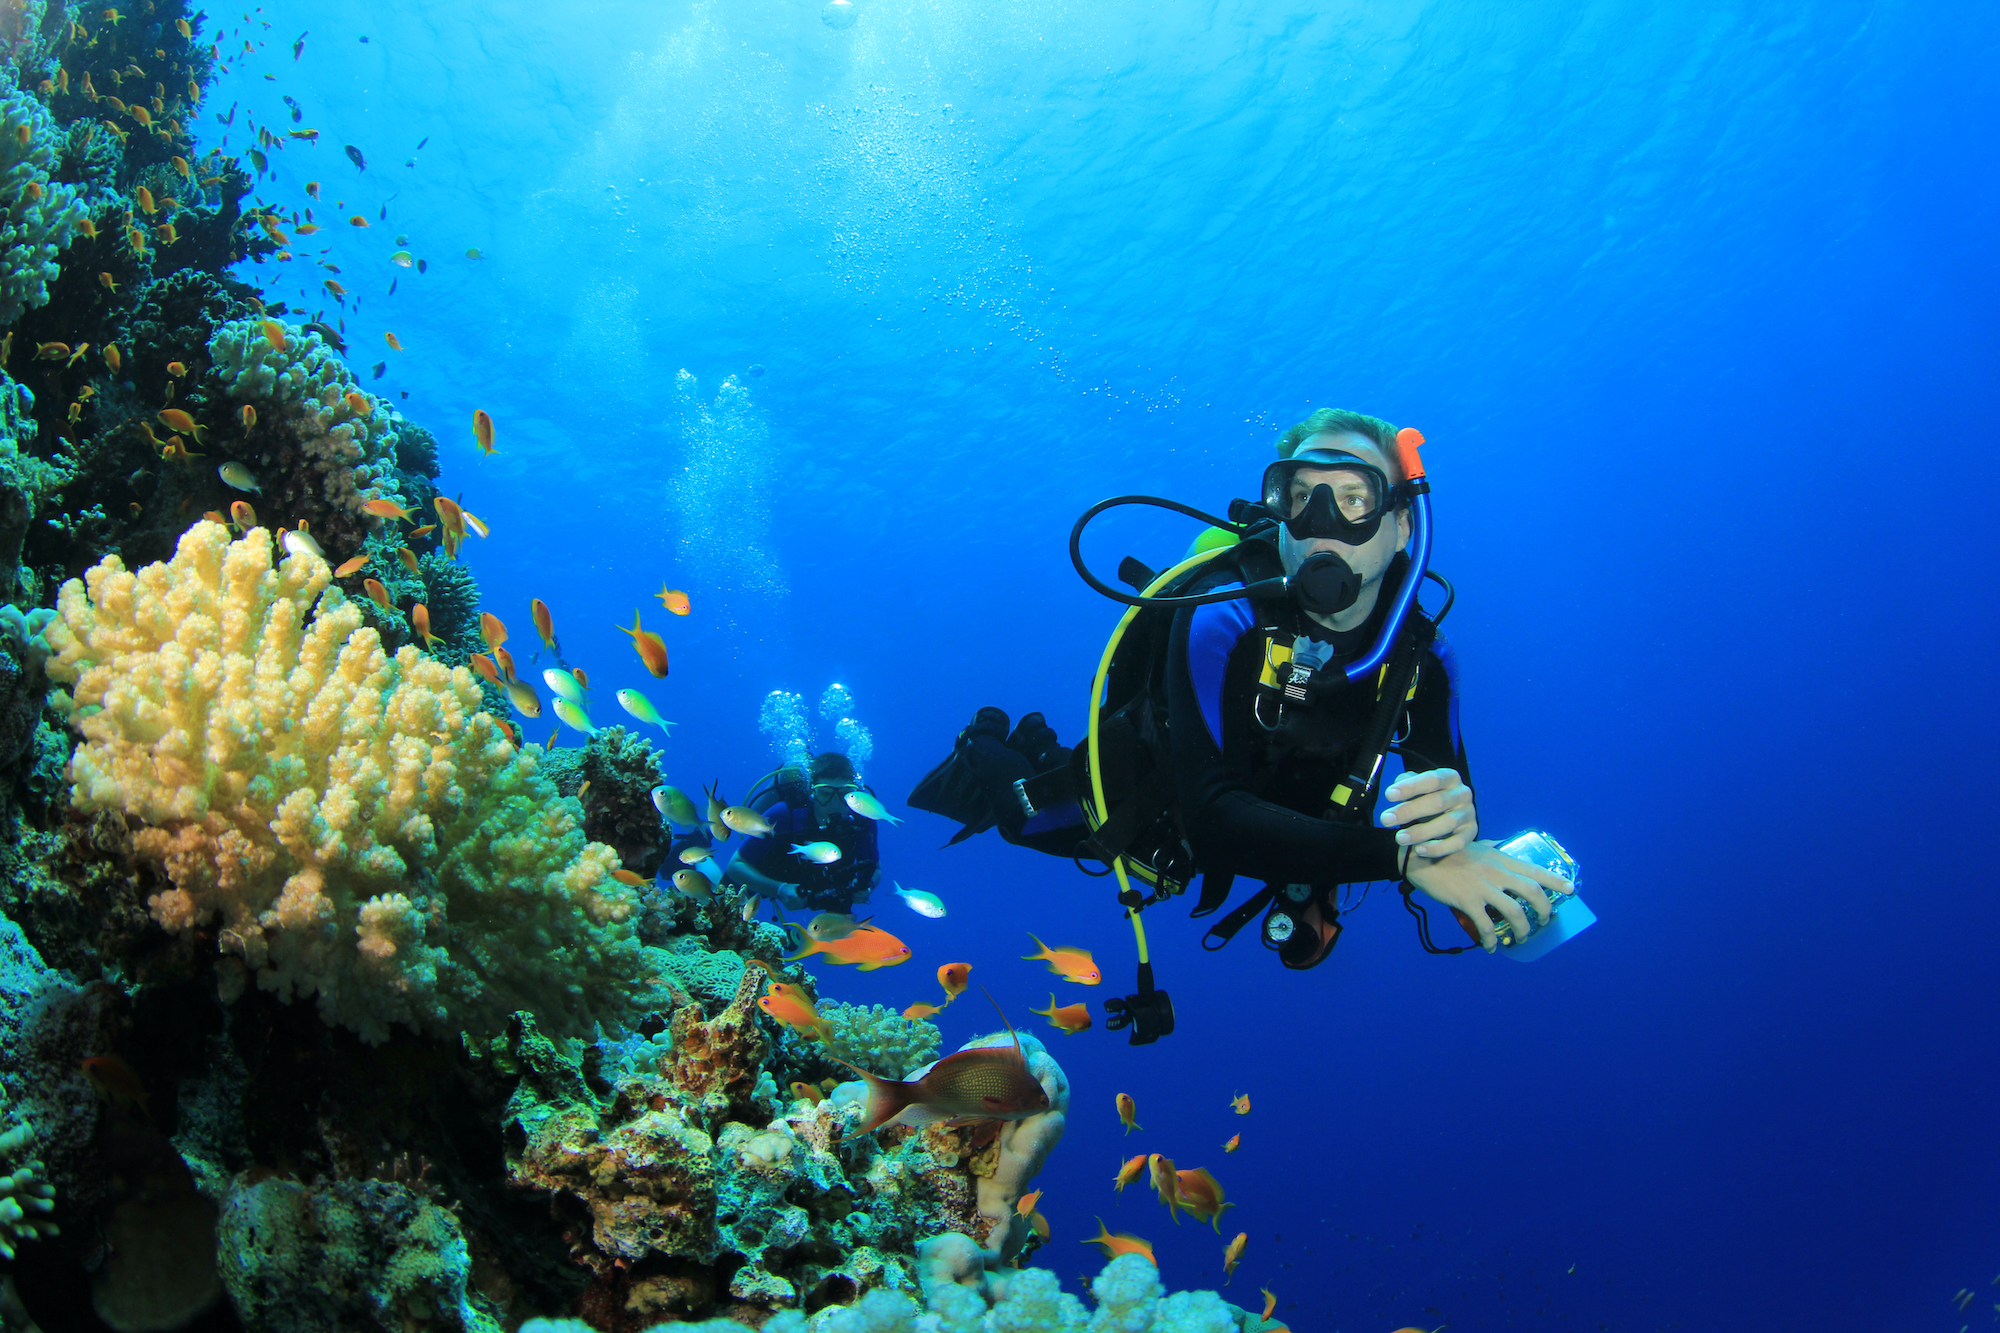 A scuba diver taking in the sights of a coral reef, and who learnt to dive after being given the gift of PADI eLearning